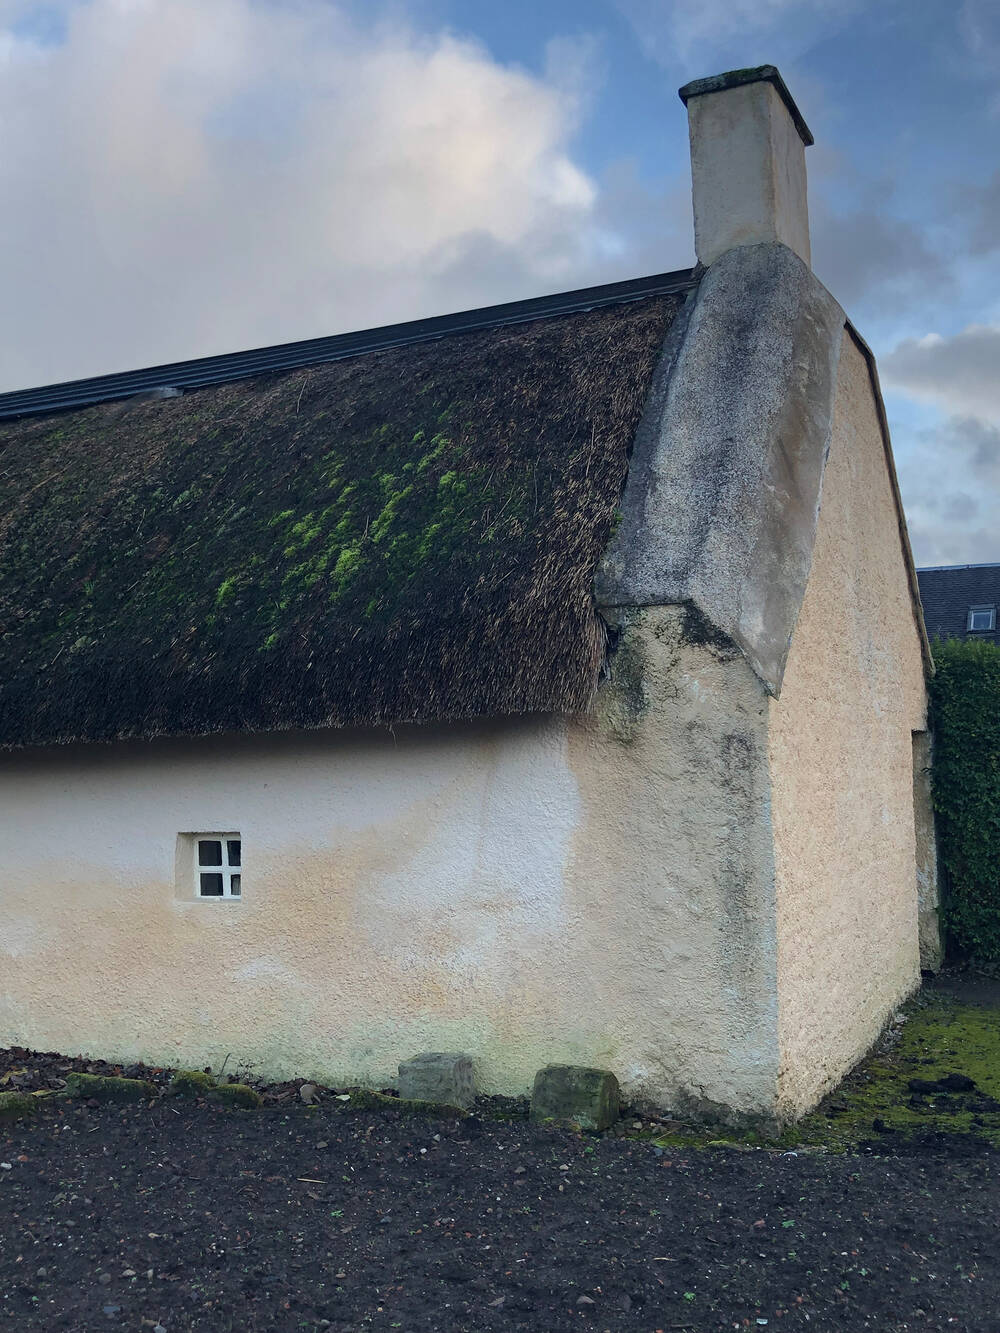 A view of the rear gable end of Burns Cottage, showing some stone decay running down from the chimney. Large patches of moss can be seen on the thatched roof. There is a lot of orange staining on the walls.